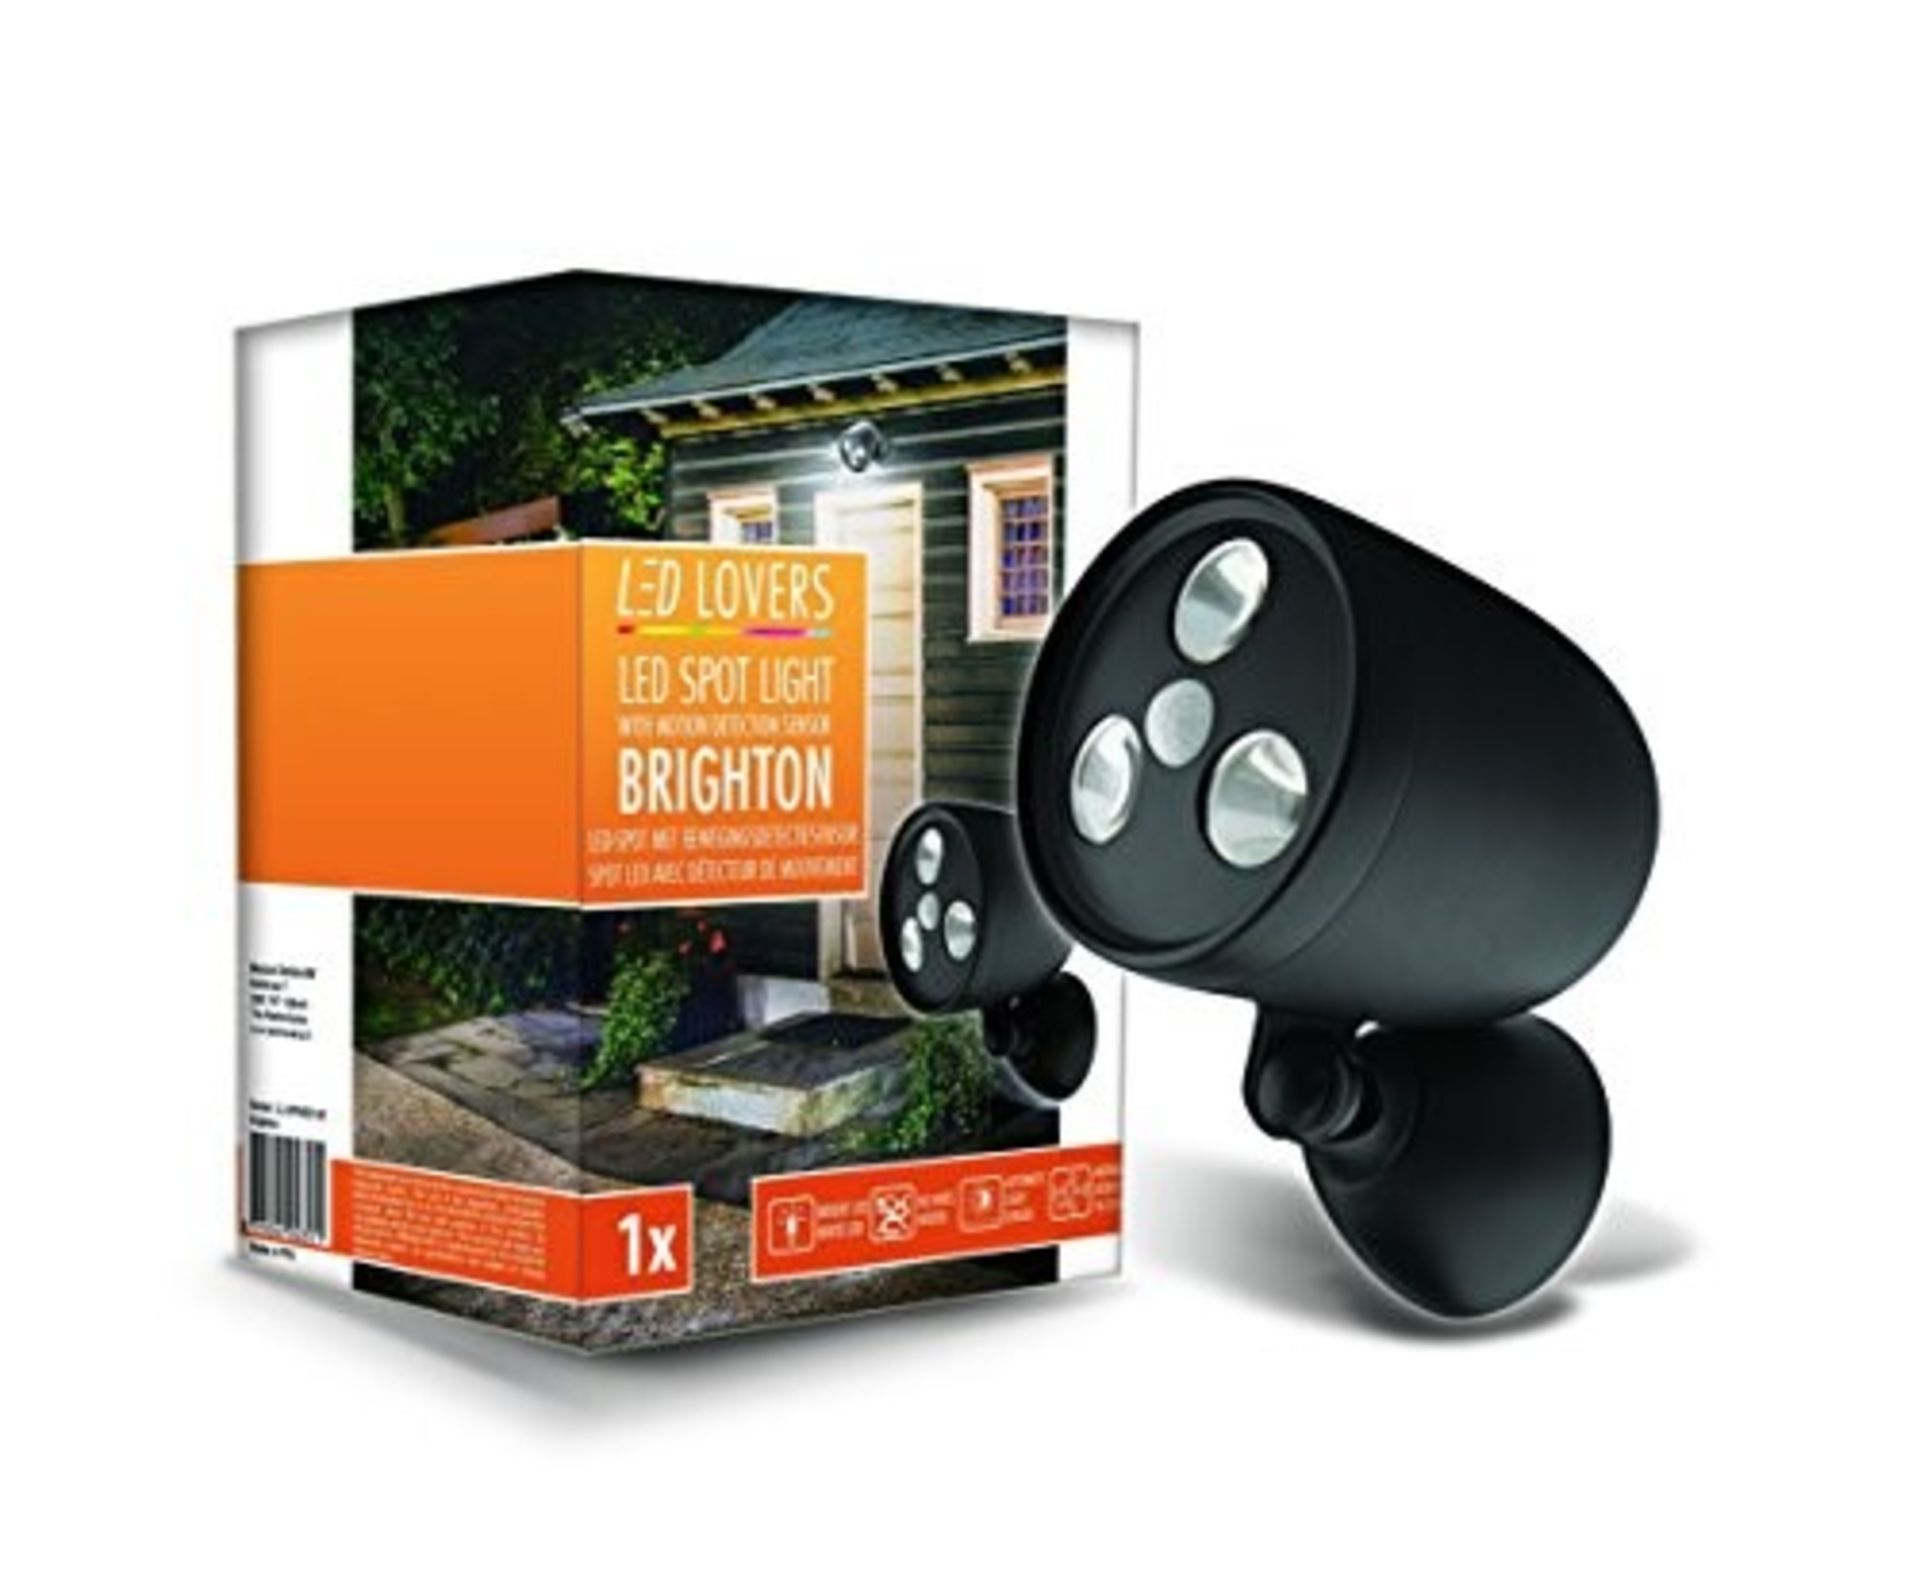 LED LOVERS Brighton Outdoor Wall Lights with Motion Sensor | Black Waterproof Battery